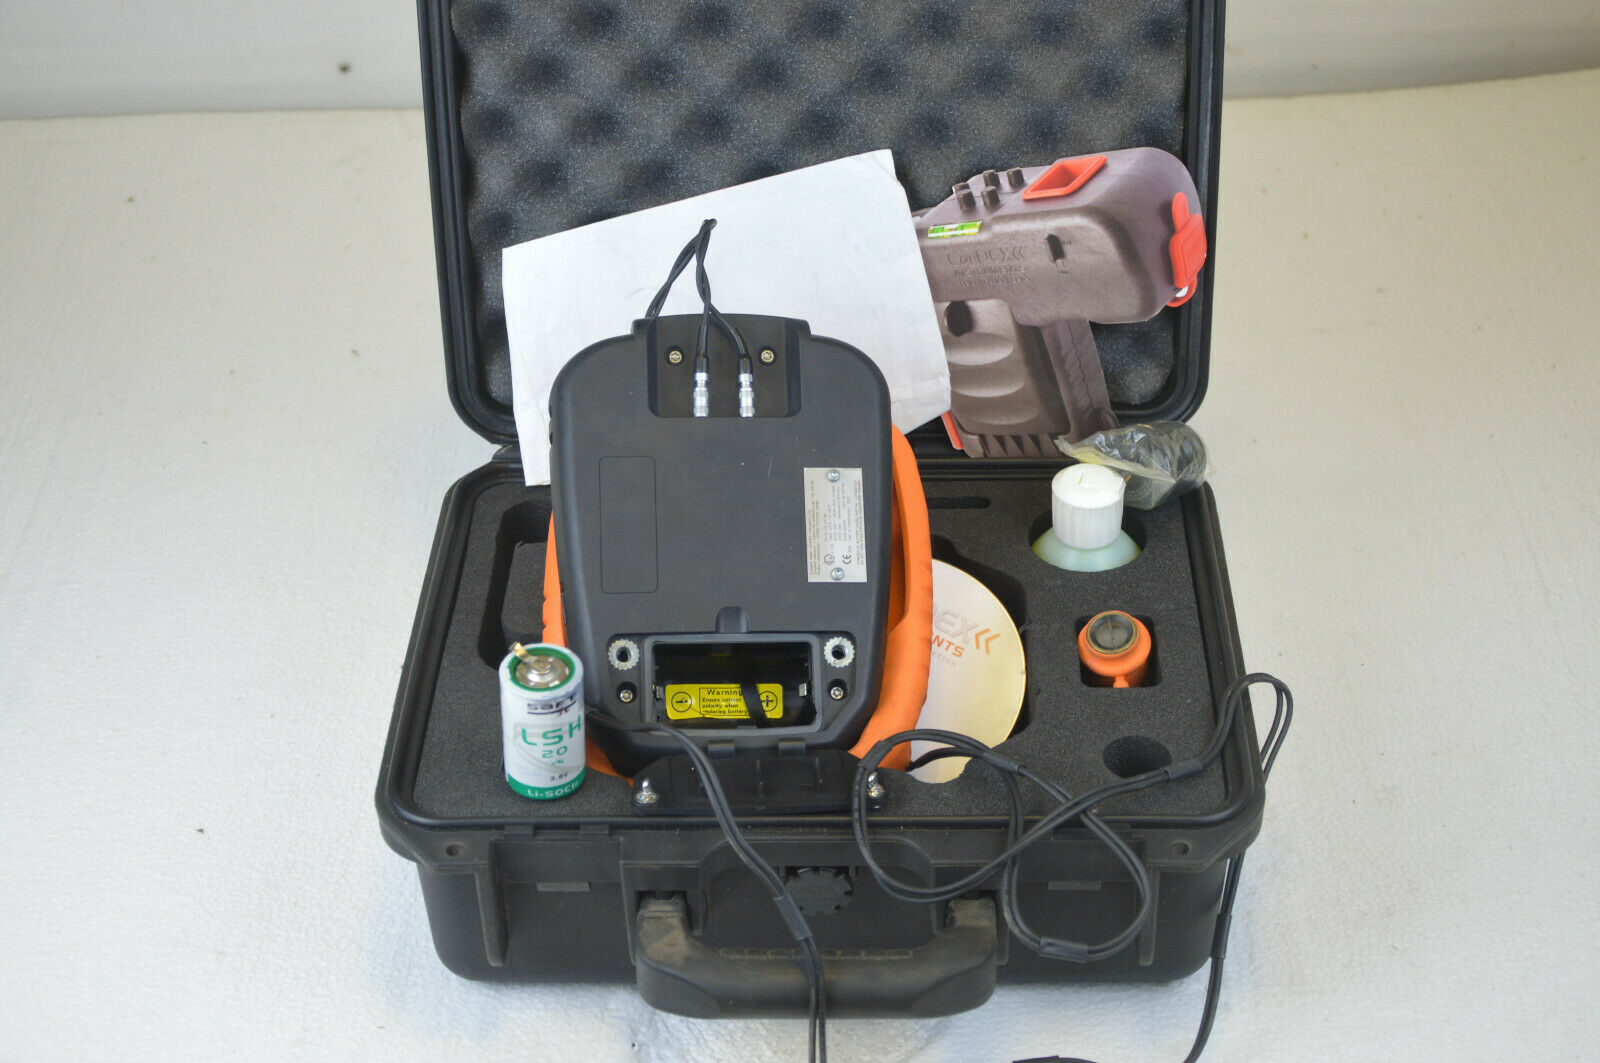 Cordex UT5000 Intrinsically Safe Thickness Gauge with CorDEX CONNECT;